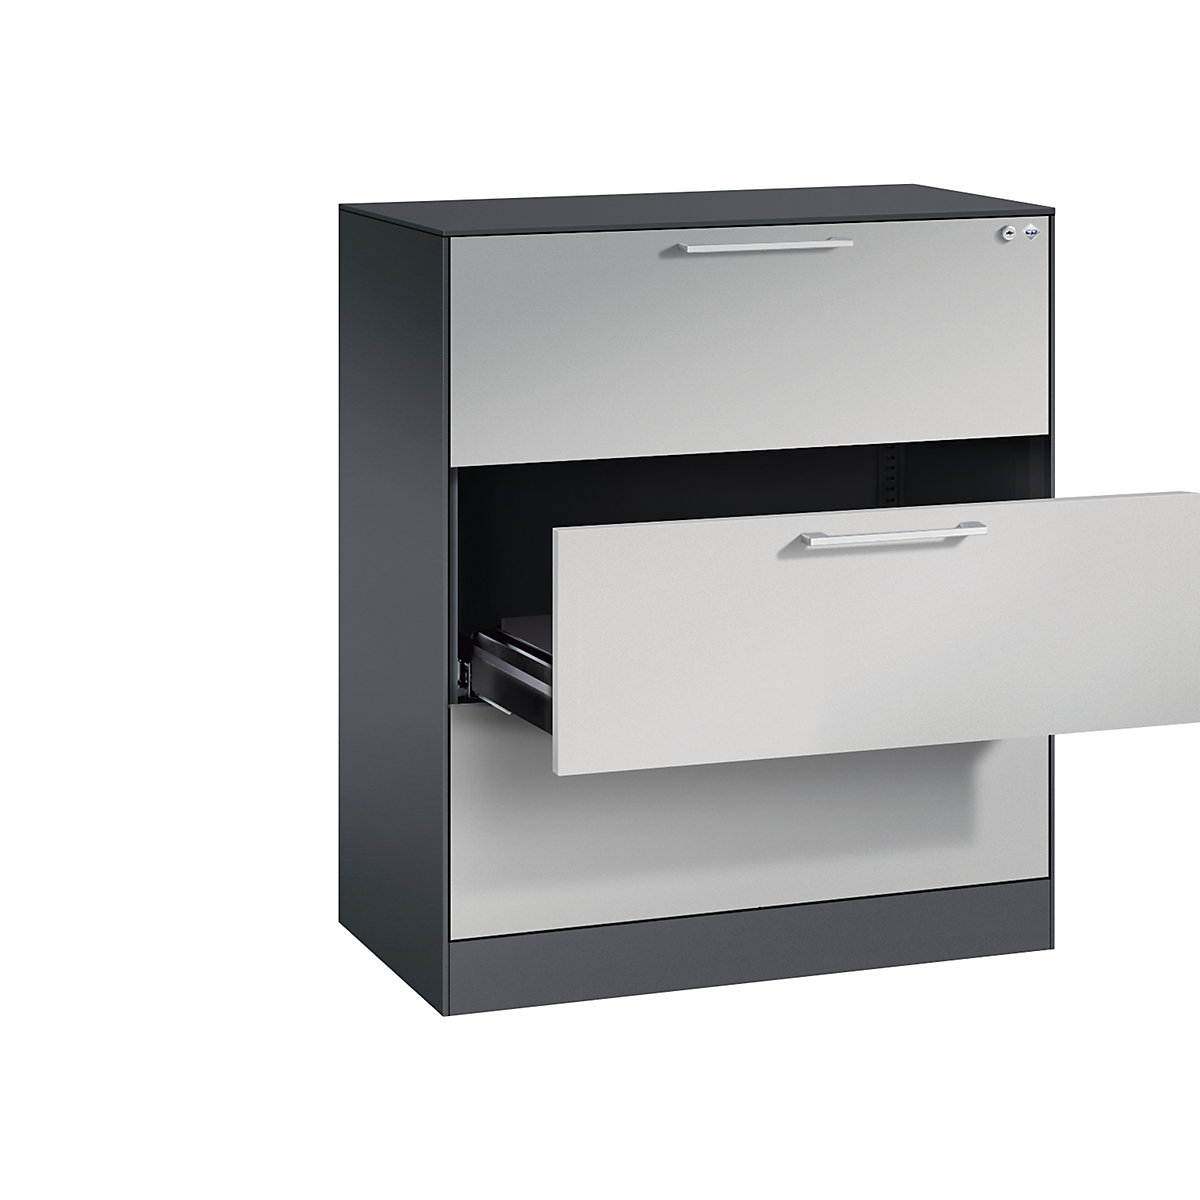 ASISTO card file cabinet – C+P, height 992 mm, with 3 drawers, A4 landscape, black grey/white aluminium-5